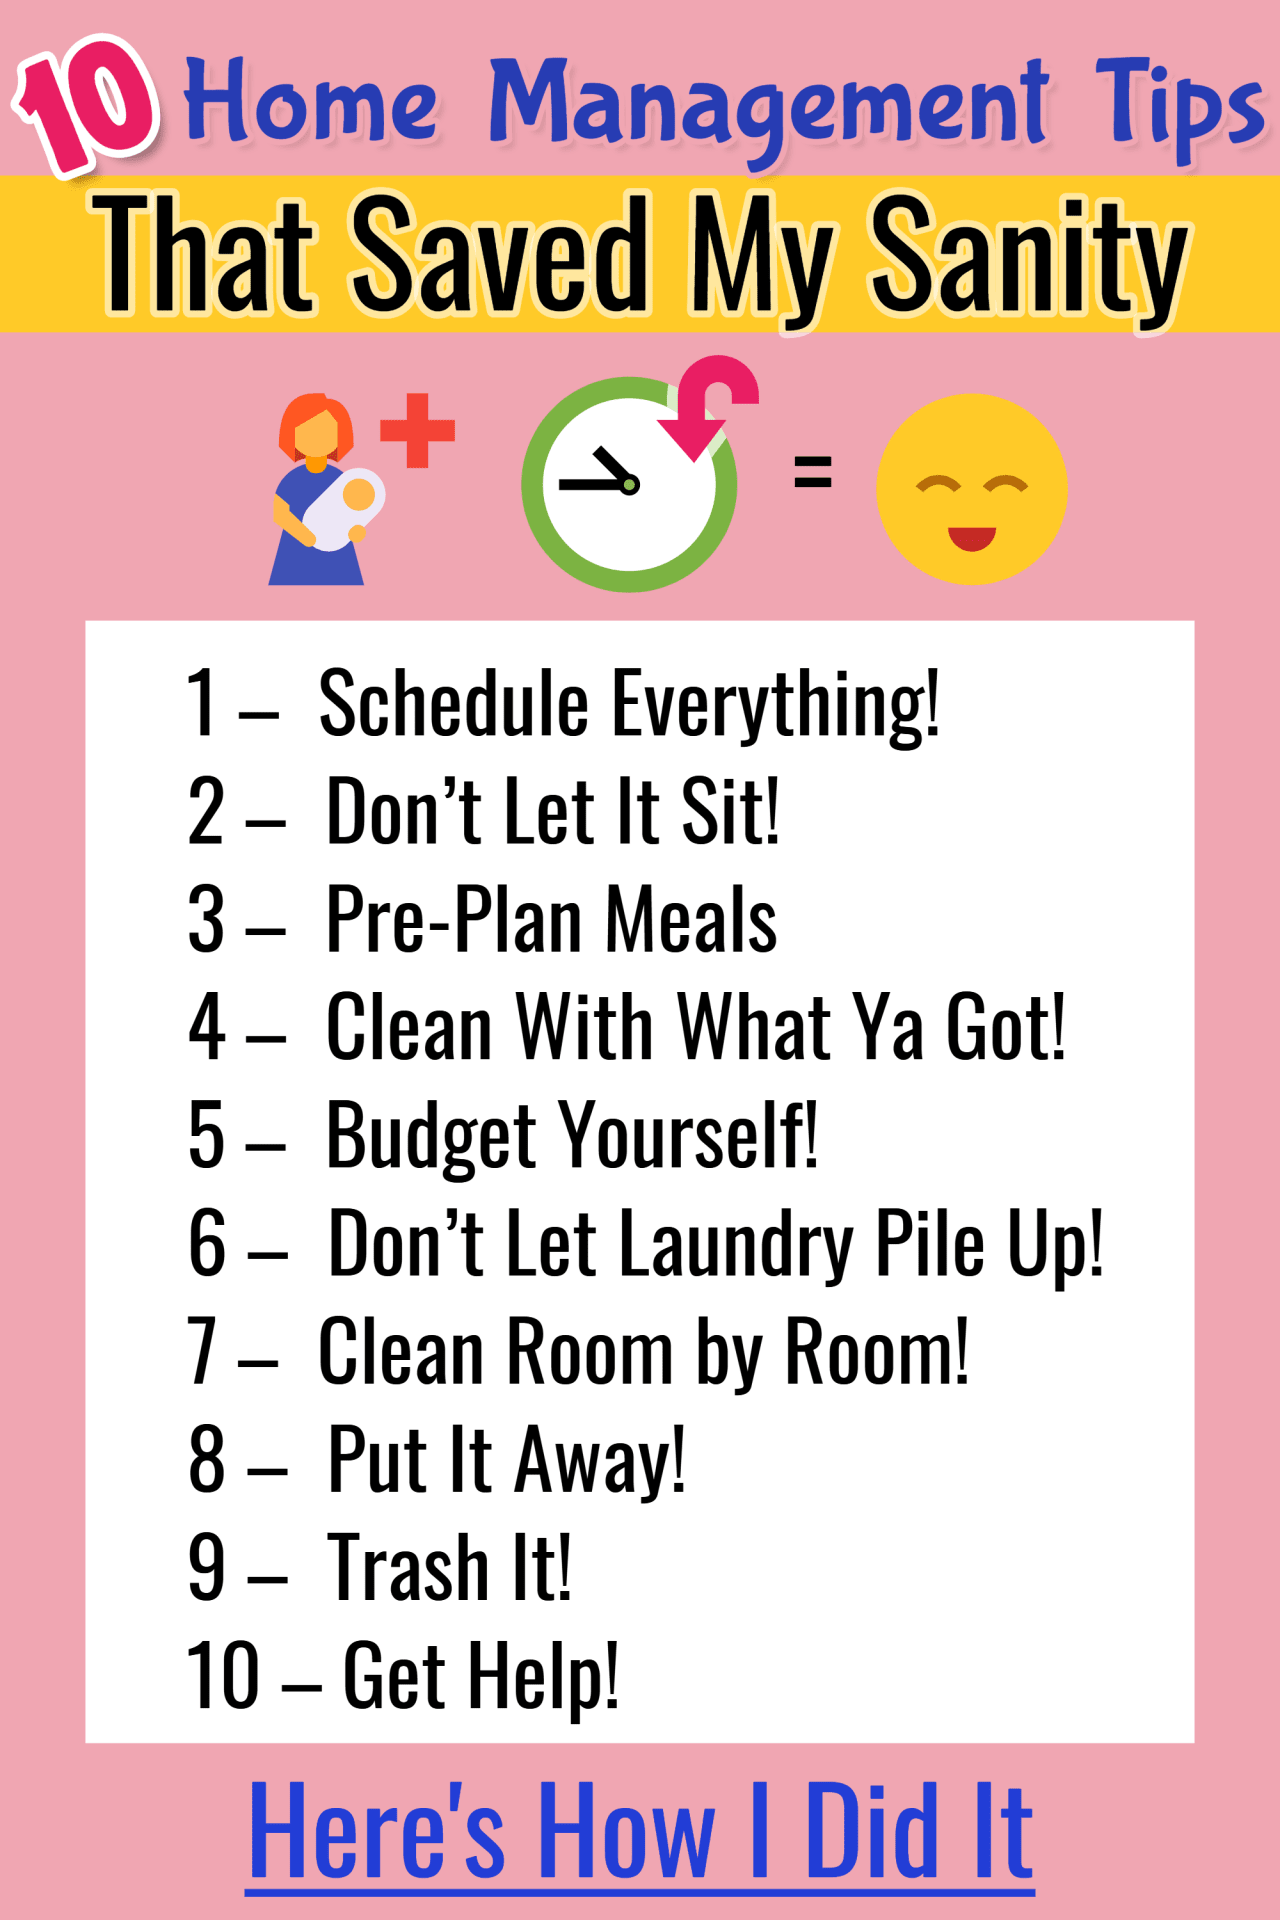 Mom Advice for Your Household Notebook or Printable Home Management Binder - These 10 simple home management tips are SO helpful for busy, overworked moms (stay at home moms AND working moms) to help get and KEEP their messy house clean (printable cleaning schedules) and stop feeling overwhelmed all the time.  These housekeeping tips and tricks really work!